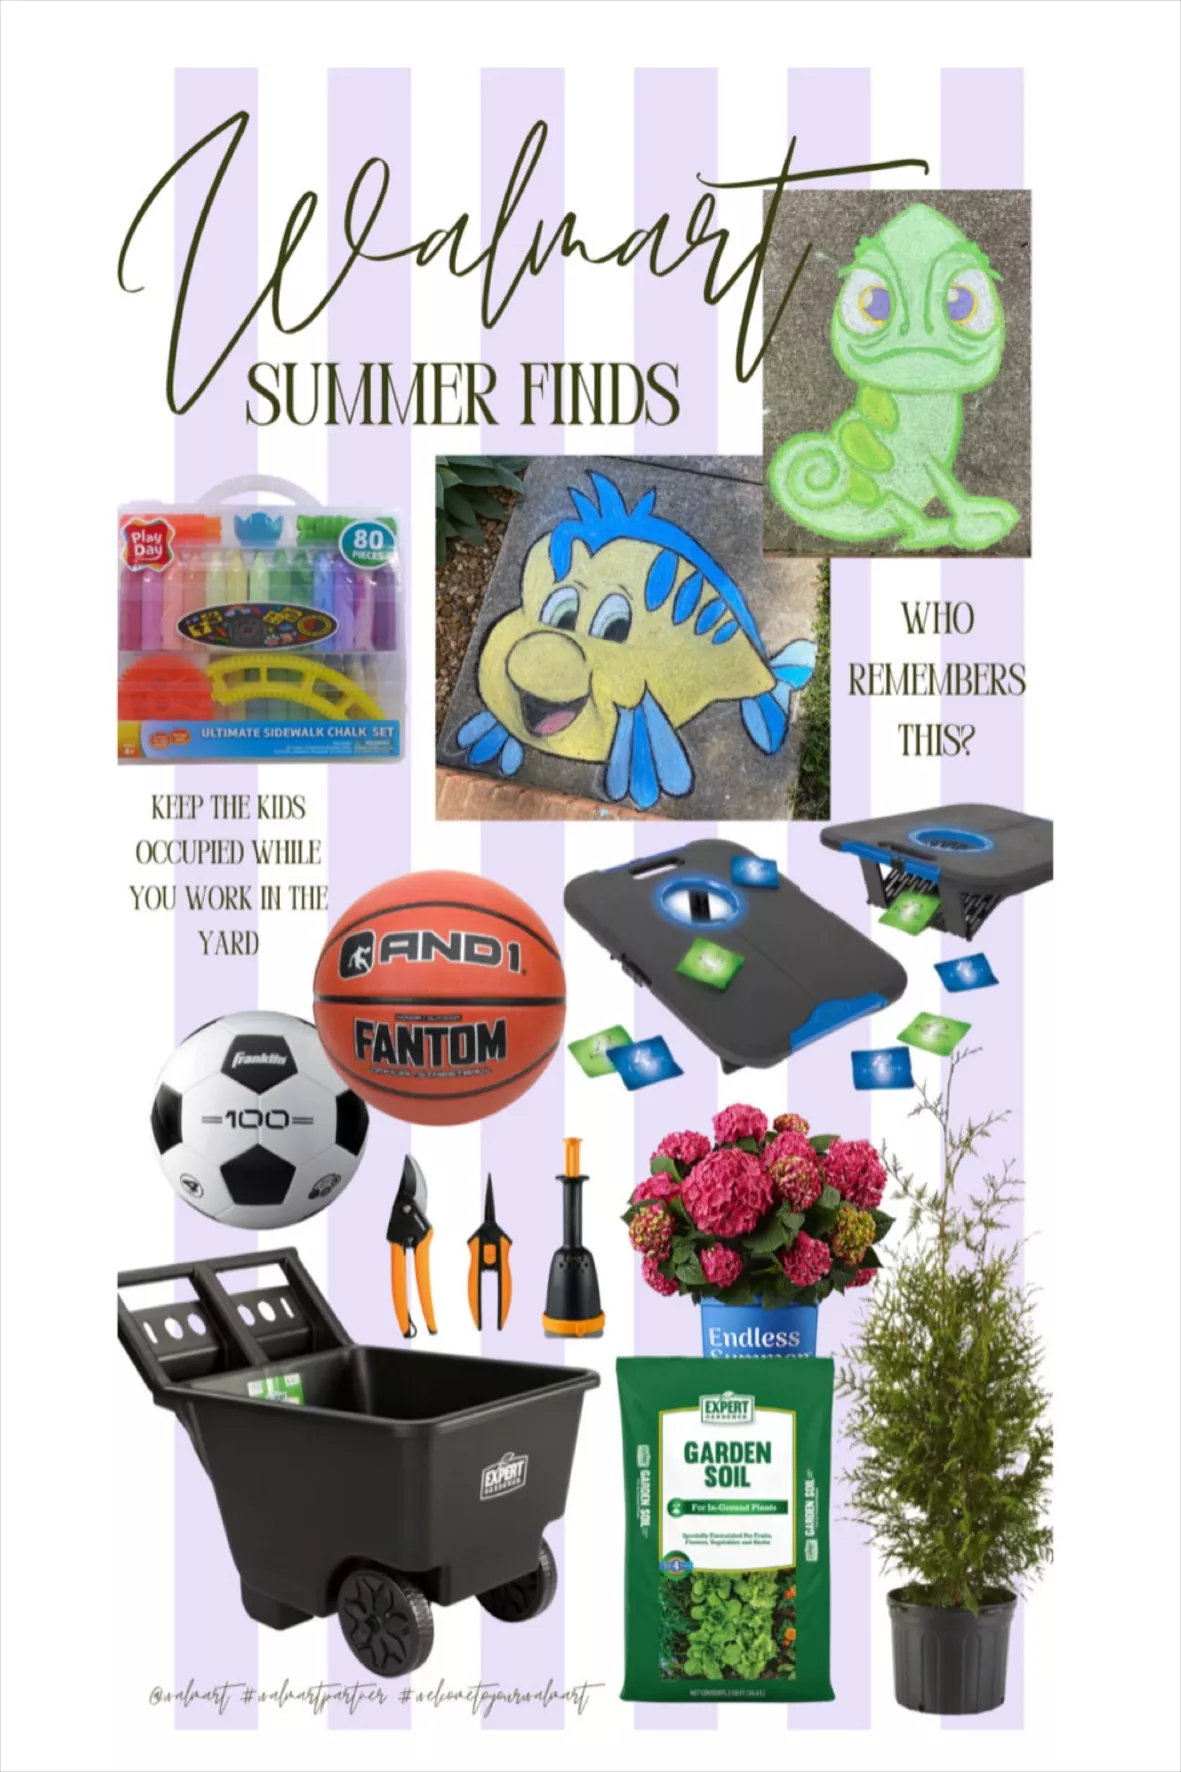 WalmartPartner The first day of Summer is officially tomorrow! So